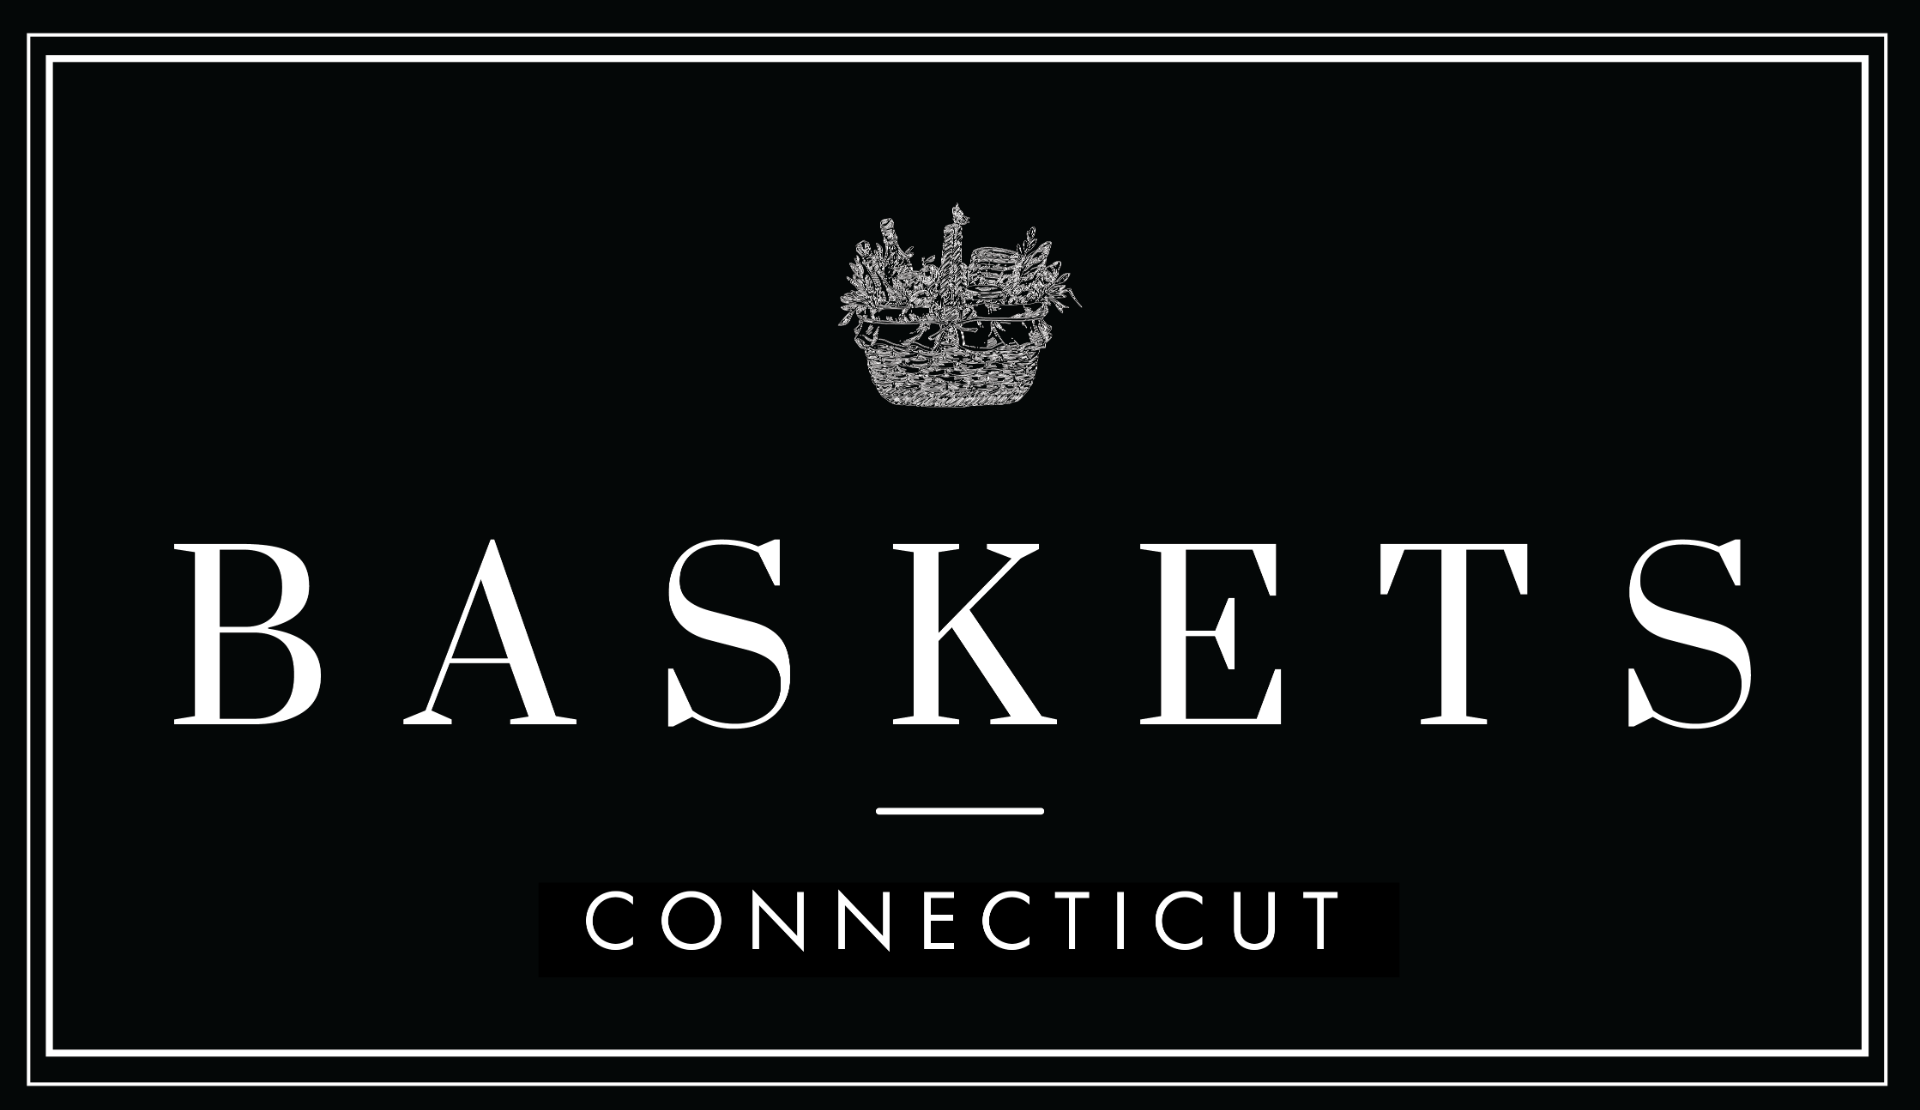 CONNECTICUT GIFT BASKETS | USA